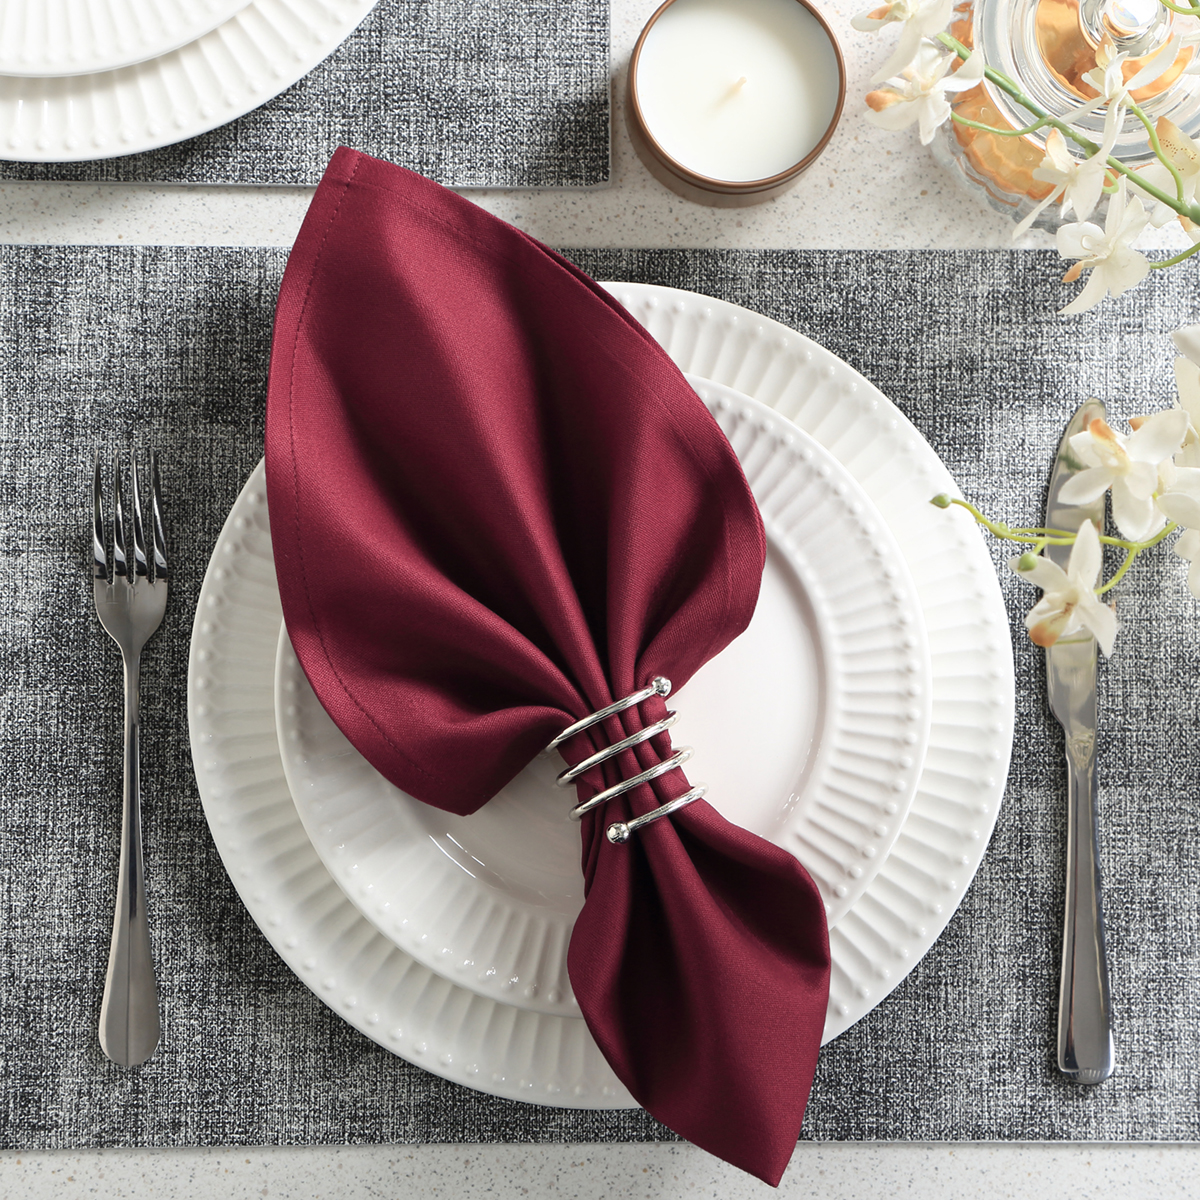 Luxuriously Soft & Hotel Quality Cotton Napkins, Brilliant Fabric Napkins Perfect for Events, Hotel & Home Use (Multi-Color)